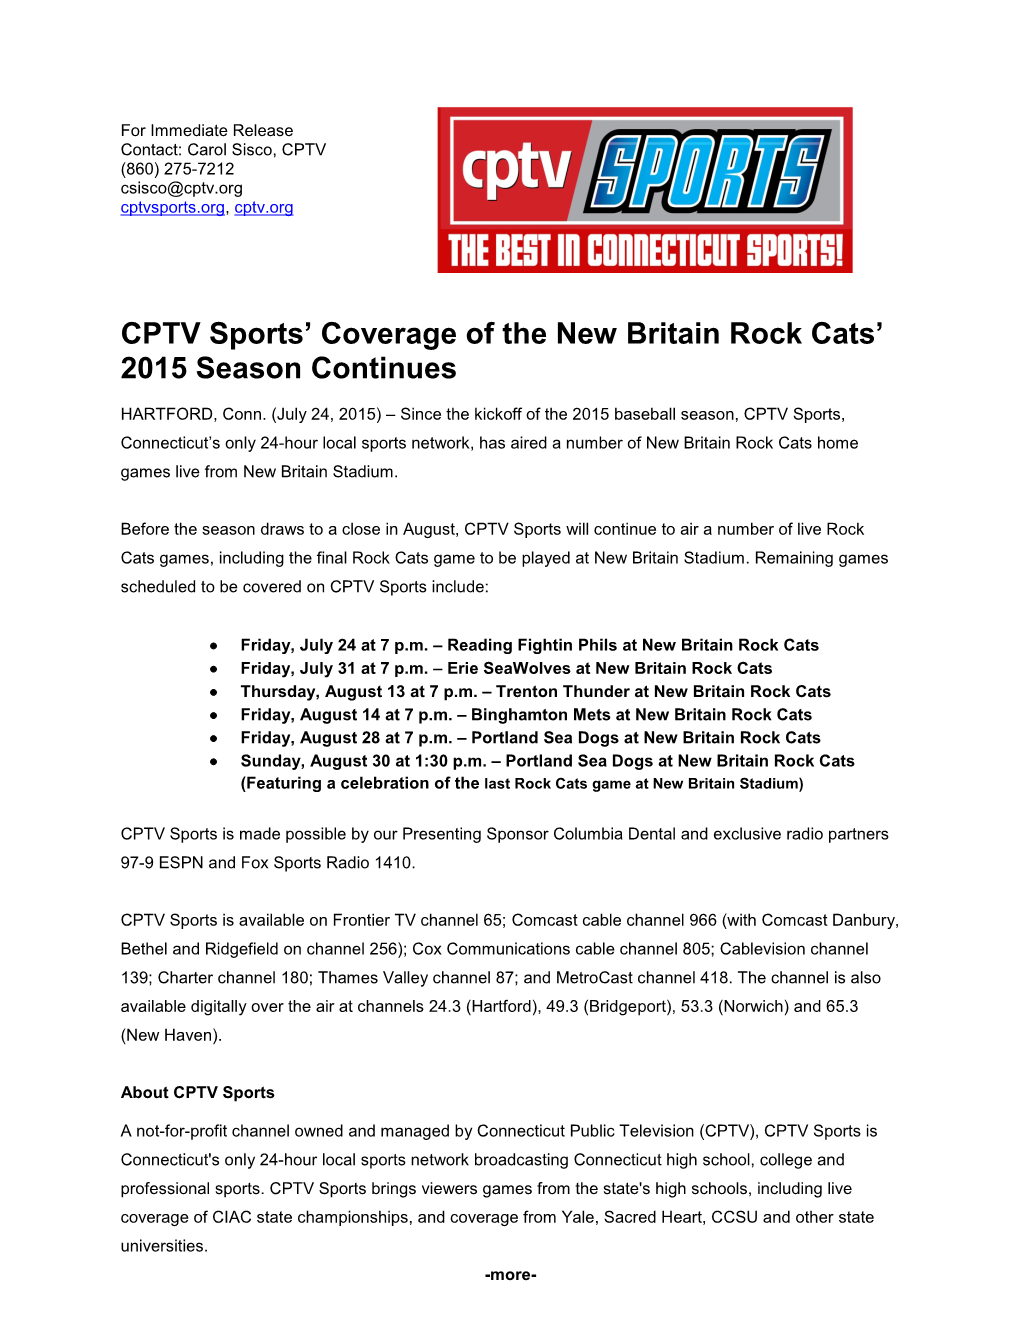 CPTV Sports' Coverage of the New Britain Rock Cats' 2015 Season